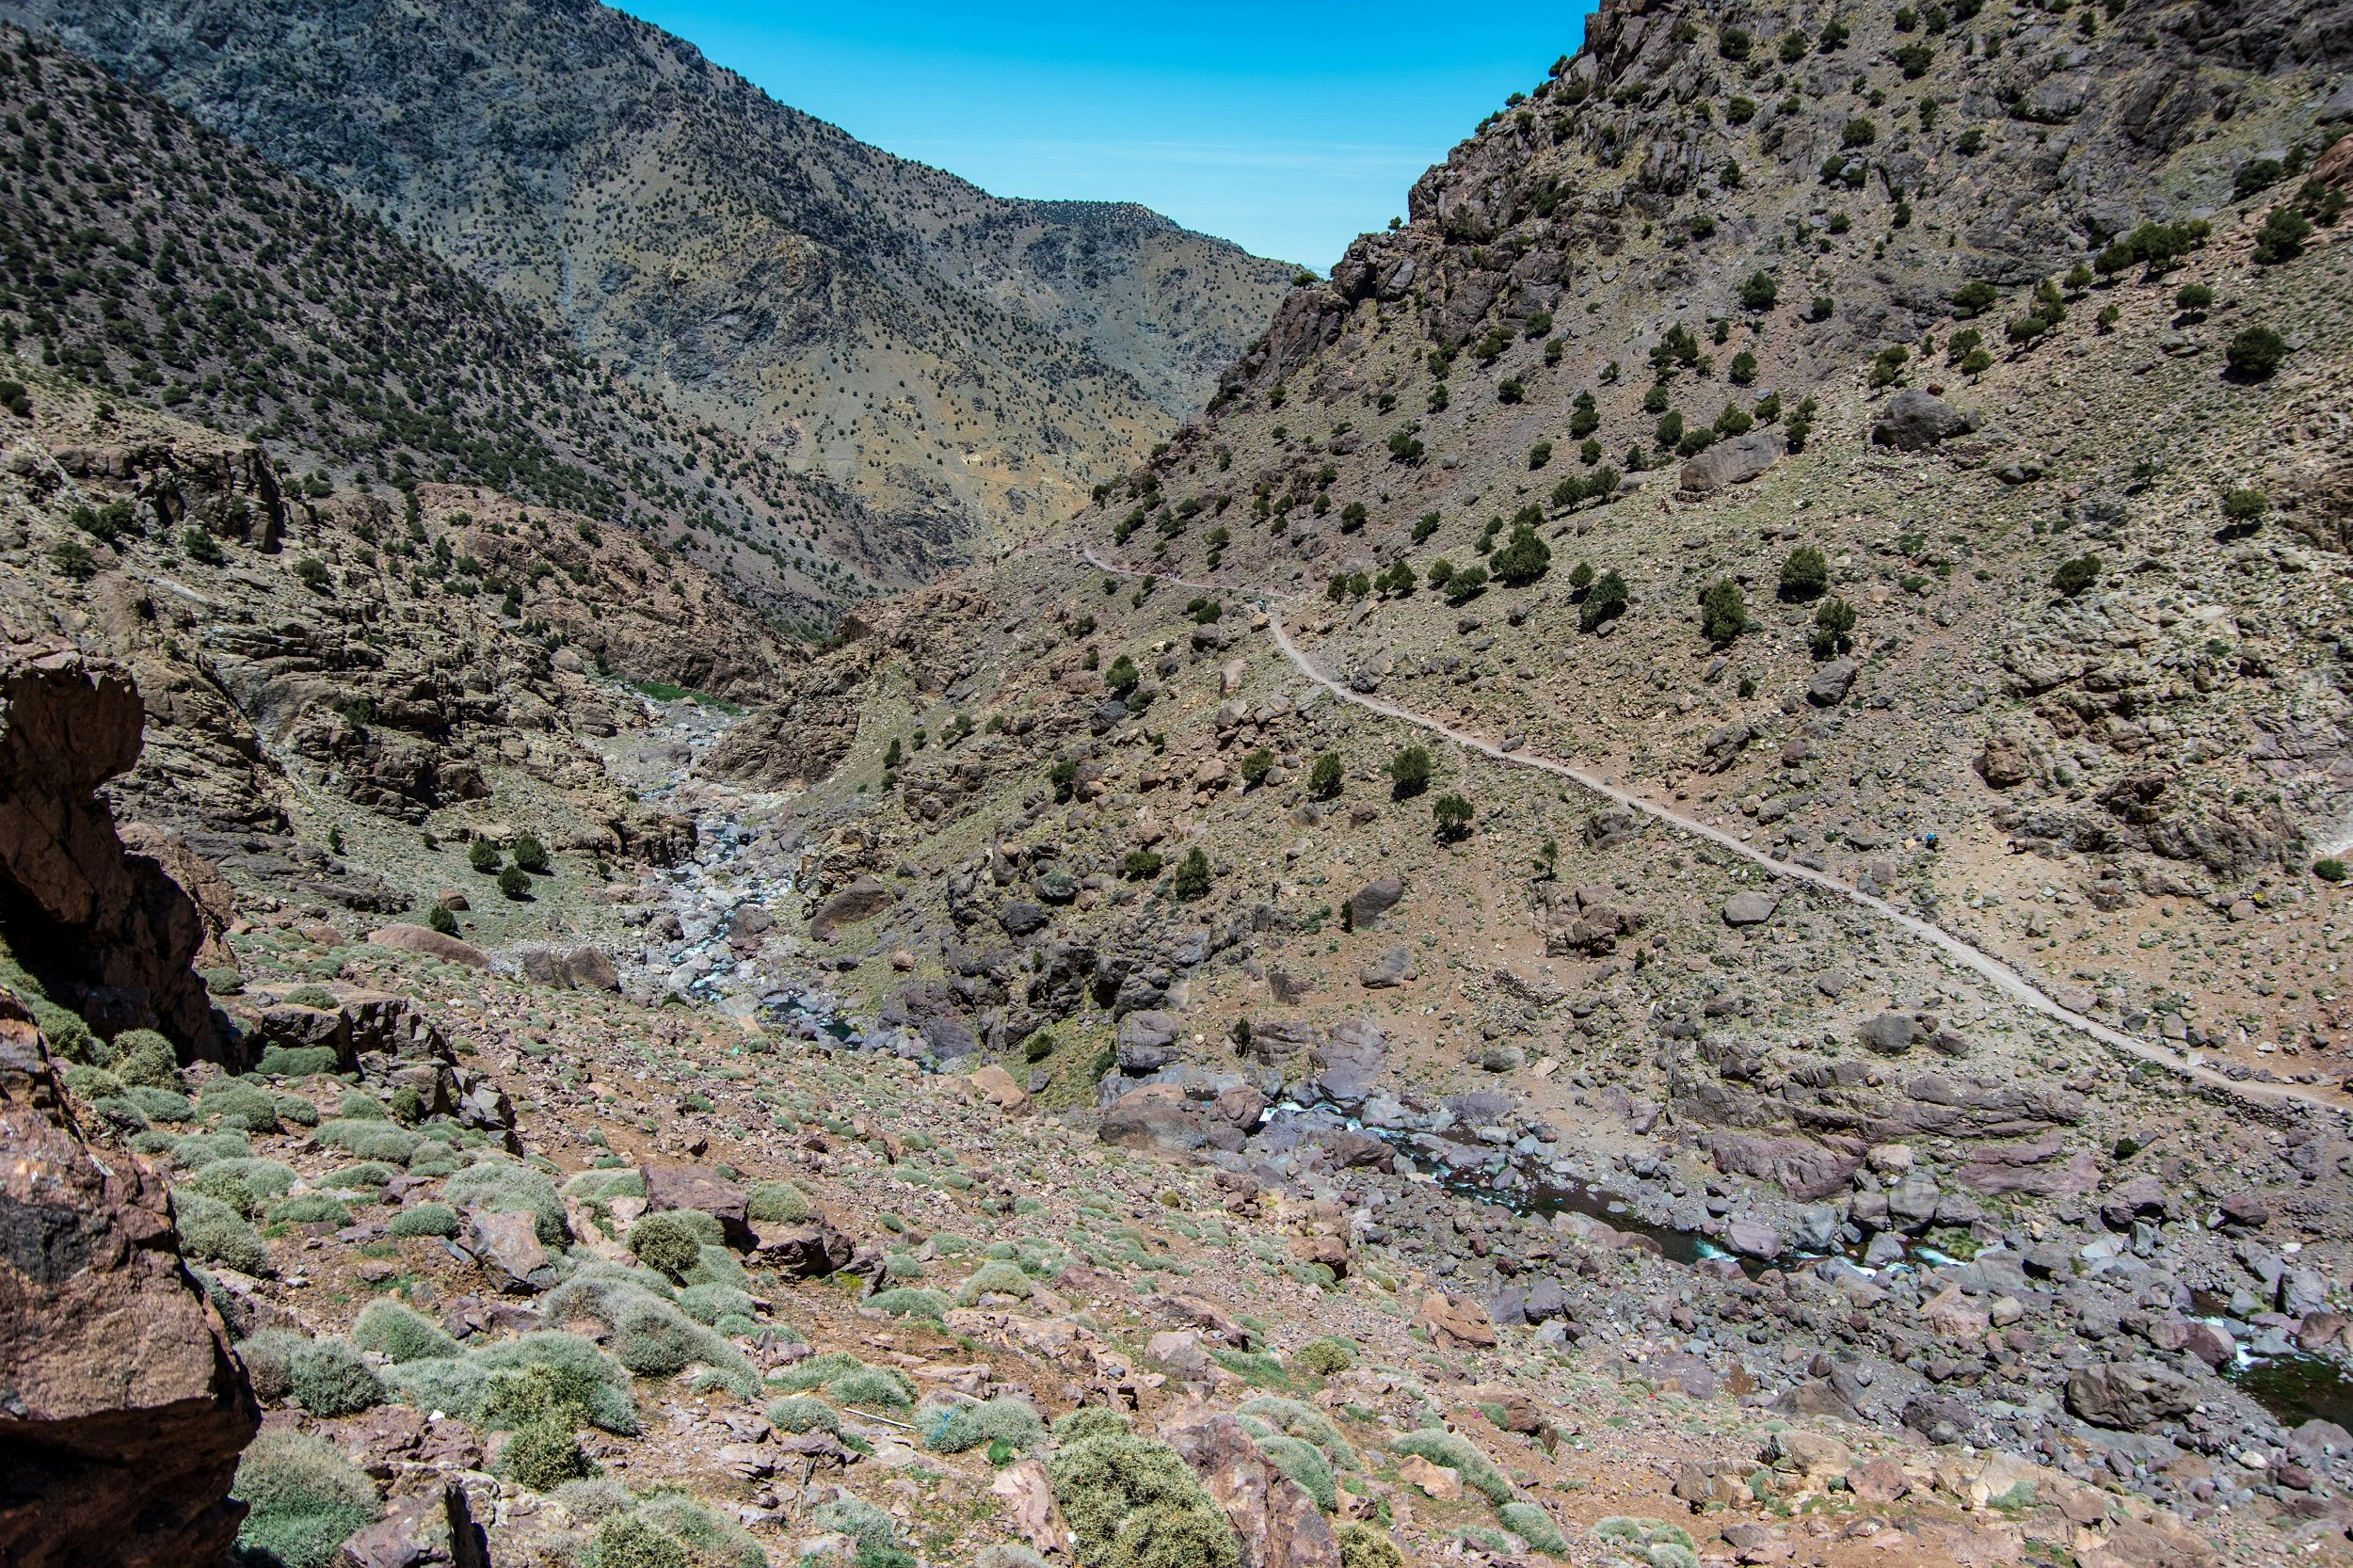 A single track hiking path meanders along the steep side of a rocky valley en route to Jebel Toubkal; the valley is barren, with just some small scrubby bushes dotting the slopes.